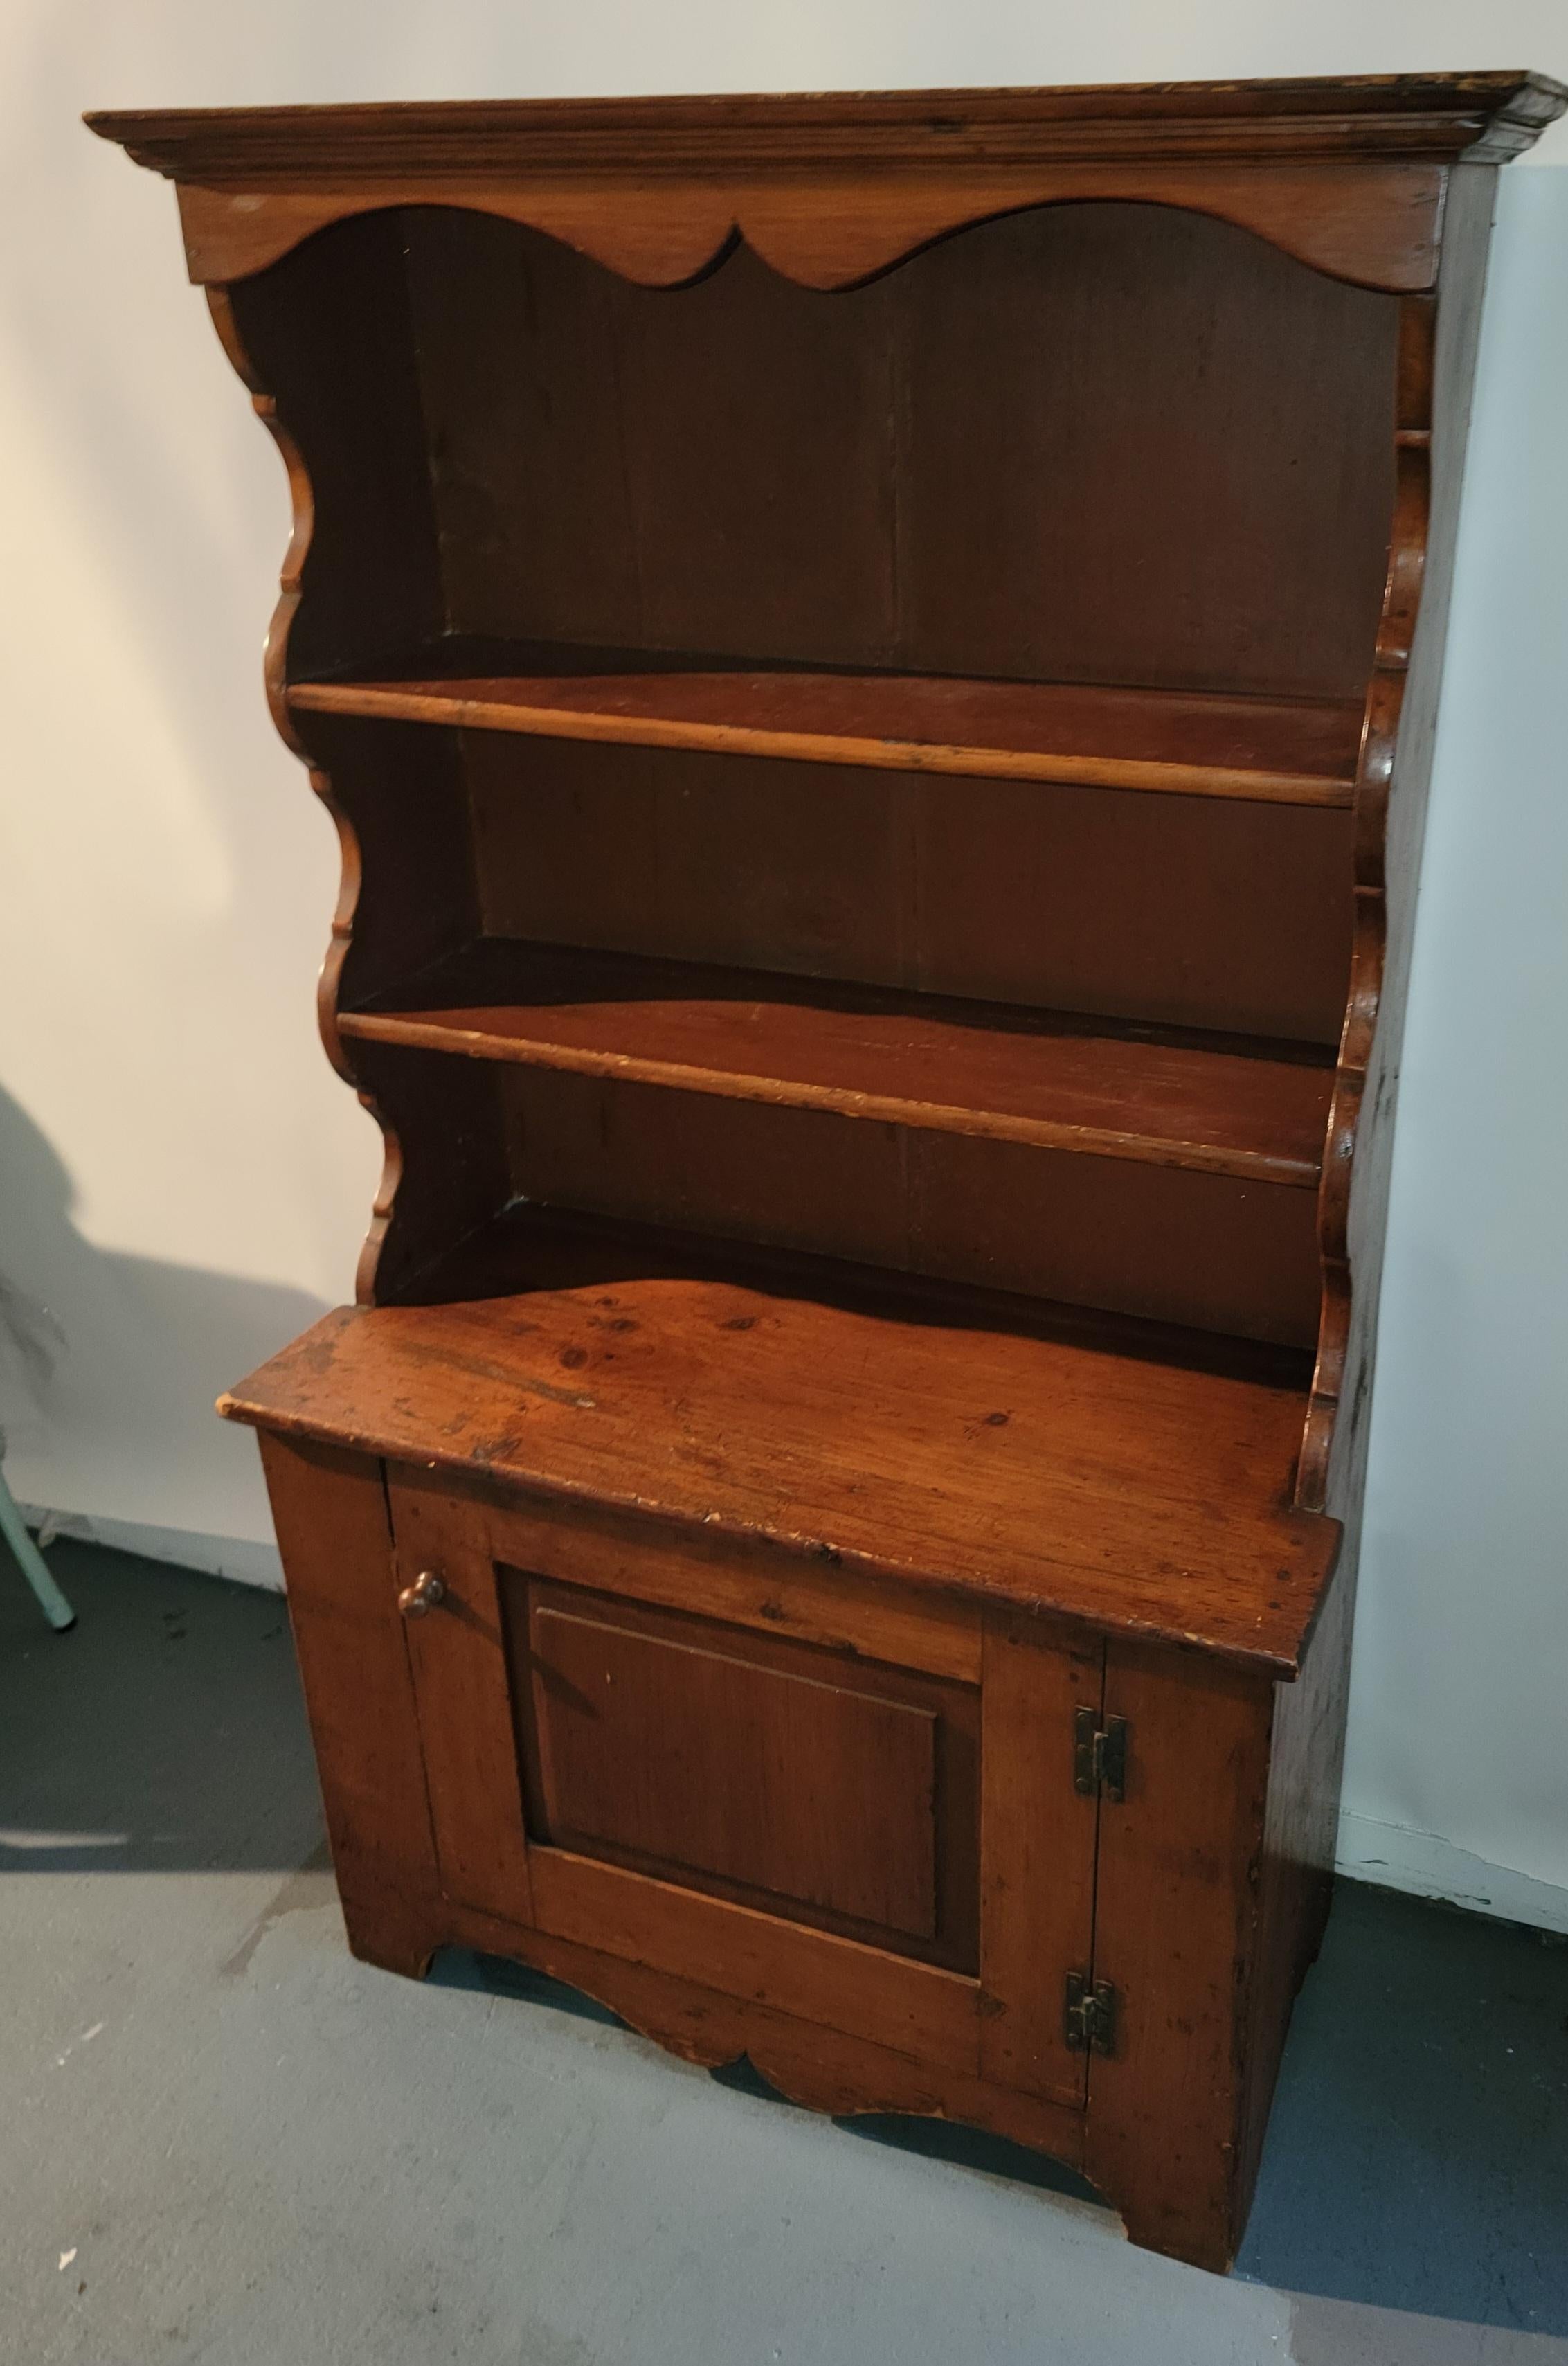 Early 19thc amazing pine step back cupboard with fantastic shelving & plate rails. This fine diminutive wall cupboard could be great in a small kitchen or bedroom or study for a book collection. It would be great in bathroom too ! Love the form.